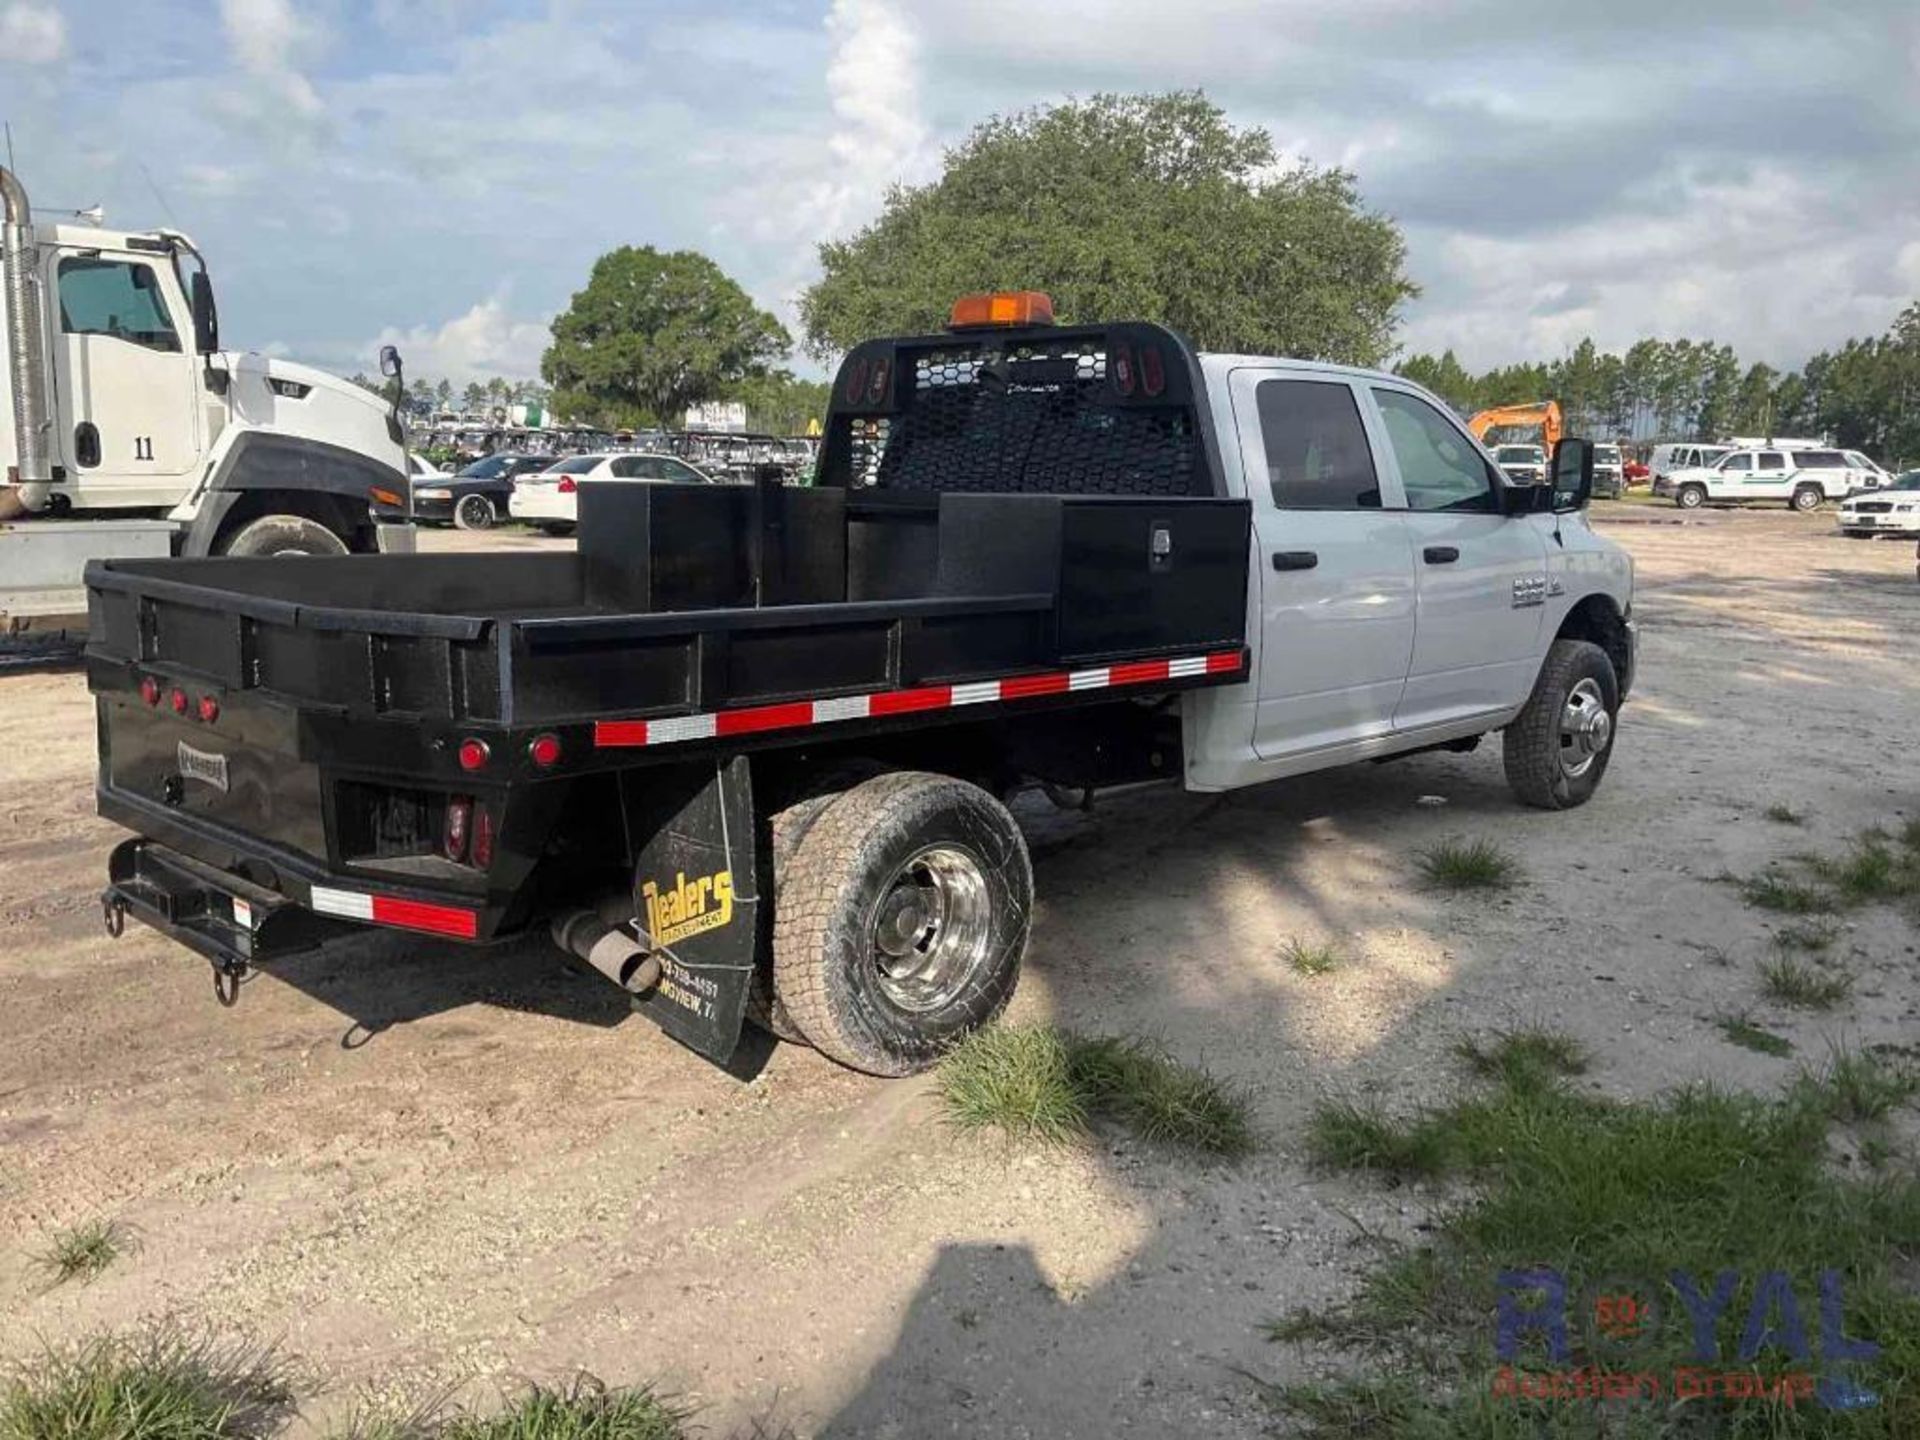 2017 Ram 3500 Flatbed Truck - Image 3 of 22